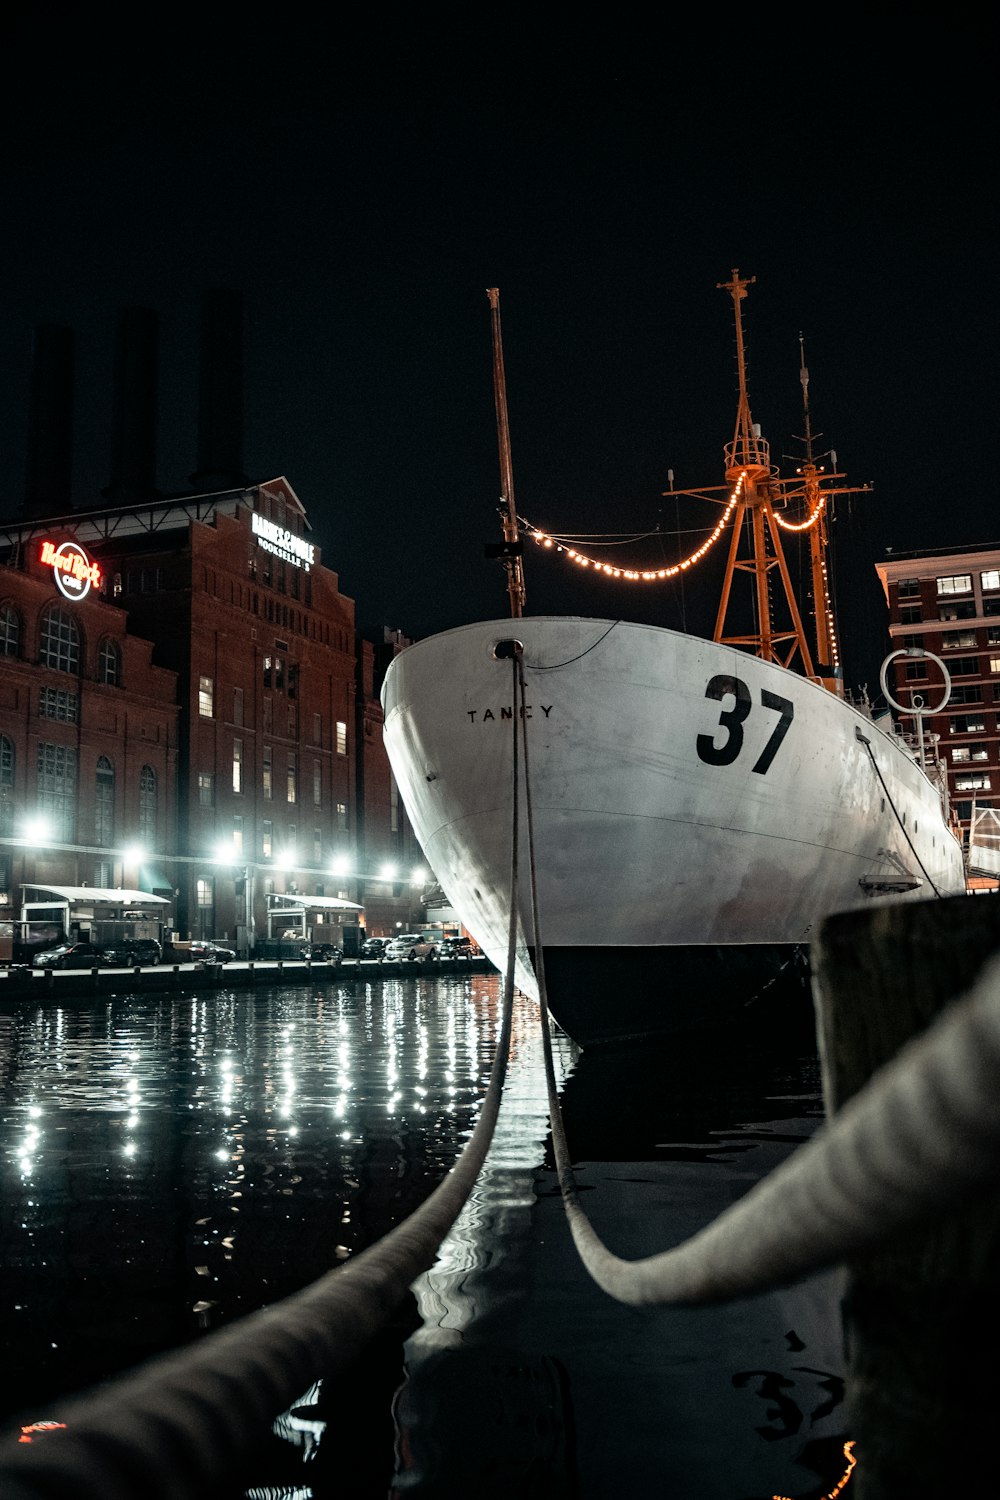 white and red ship on dock during night time